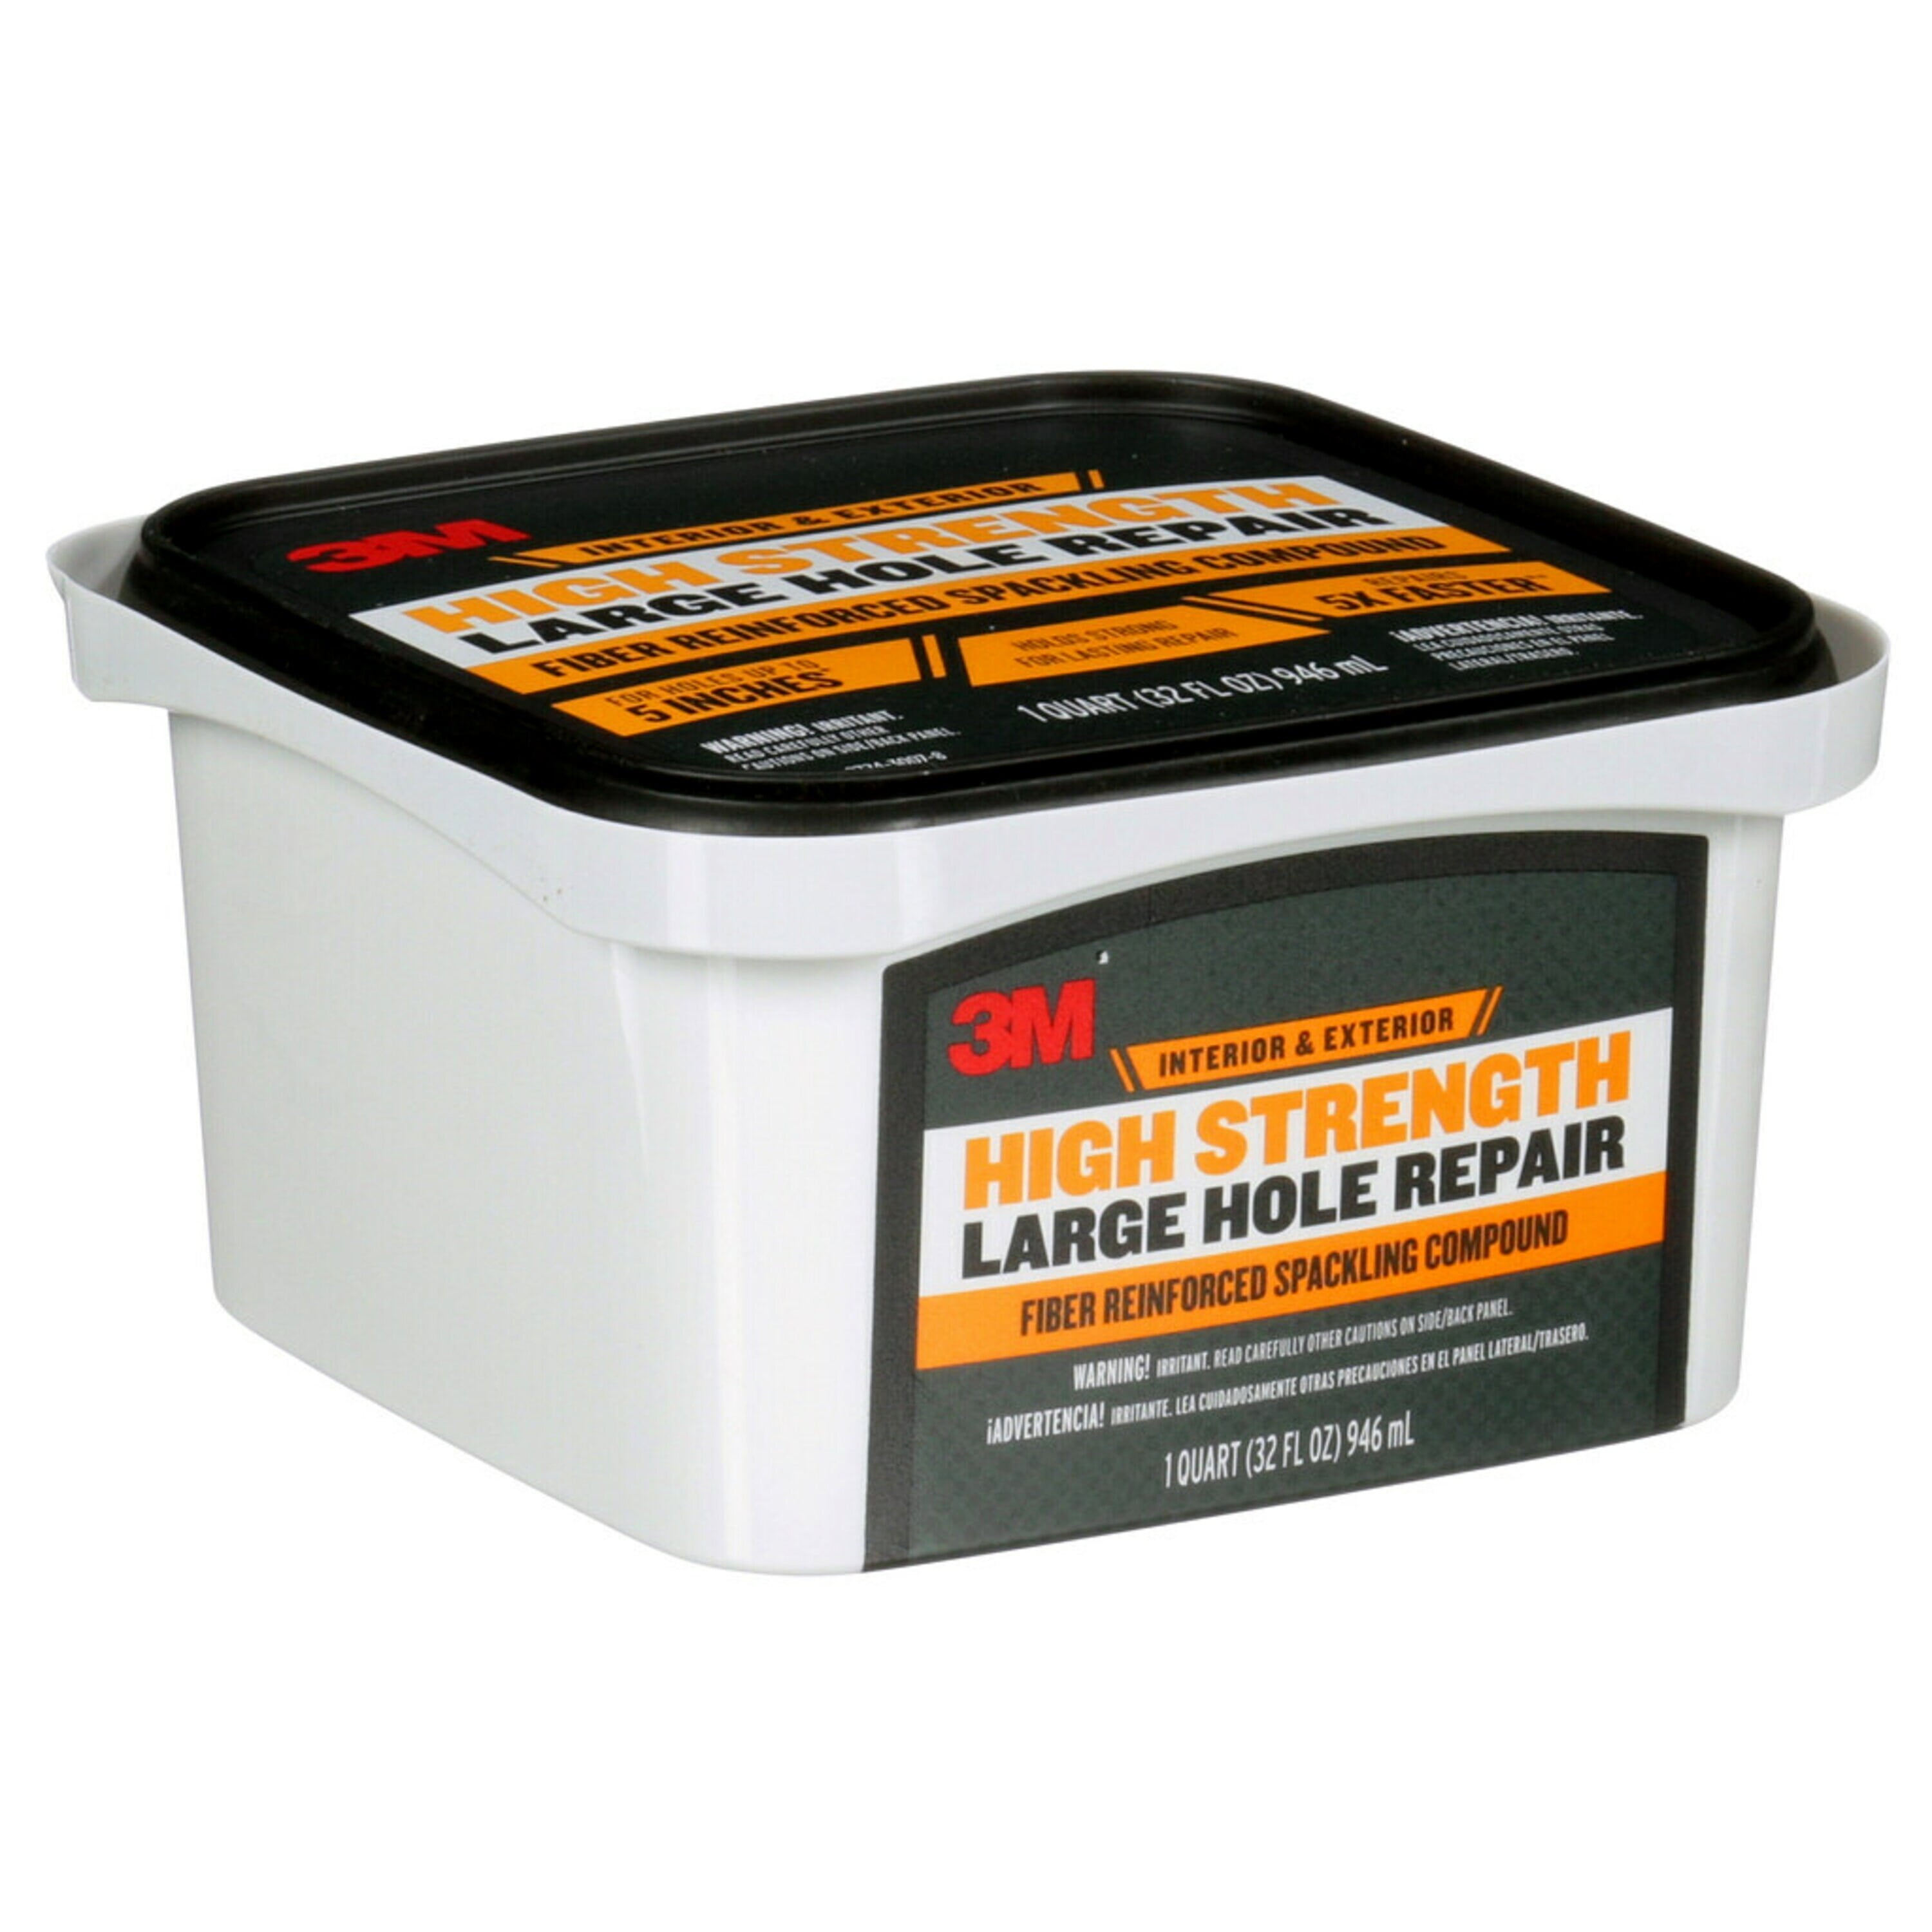 Exterior Interior Wall Large Fiber and Reinforced, 3M White, oz. Strength Hole Filler, Use, High 32